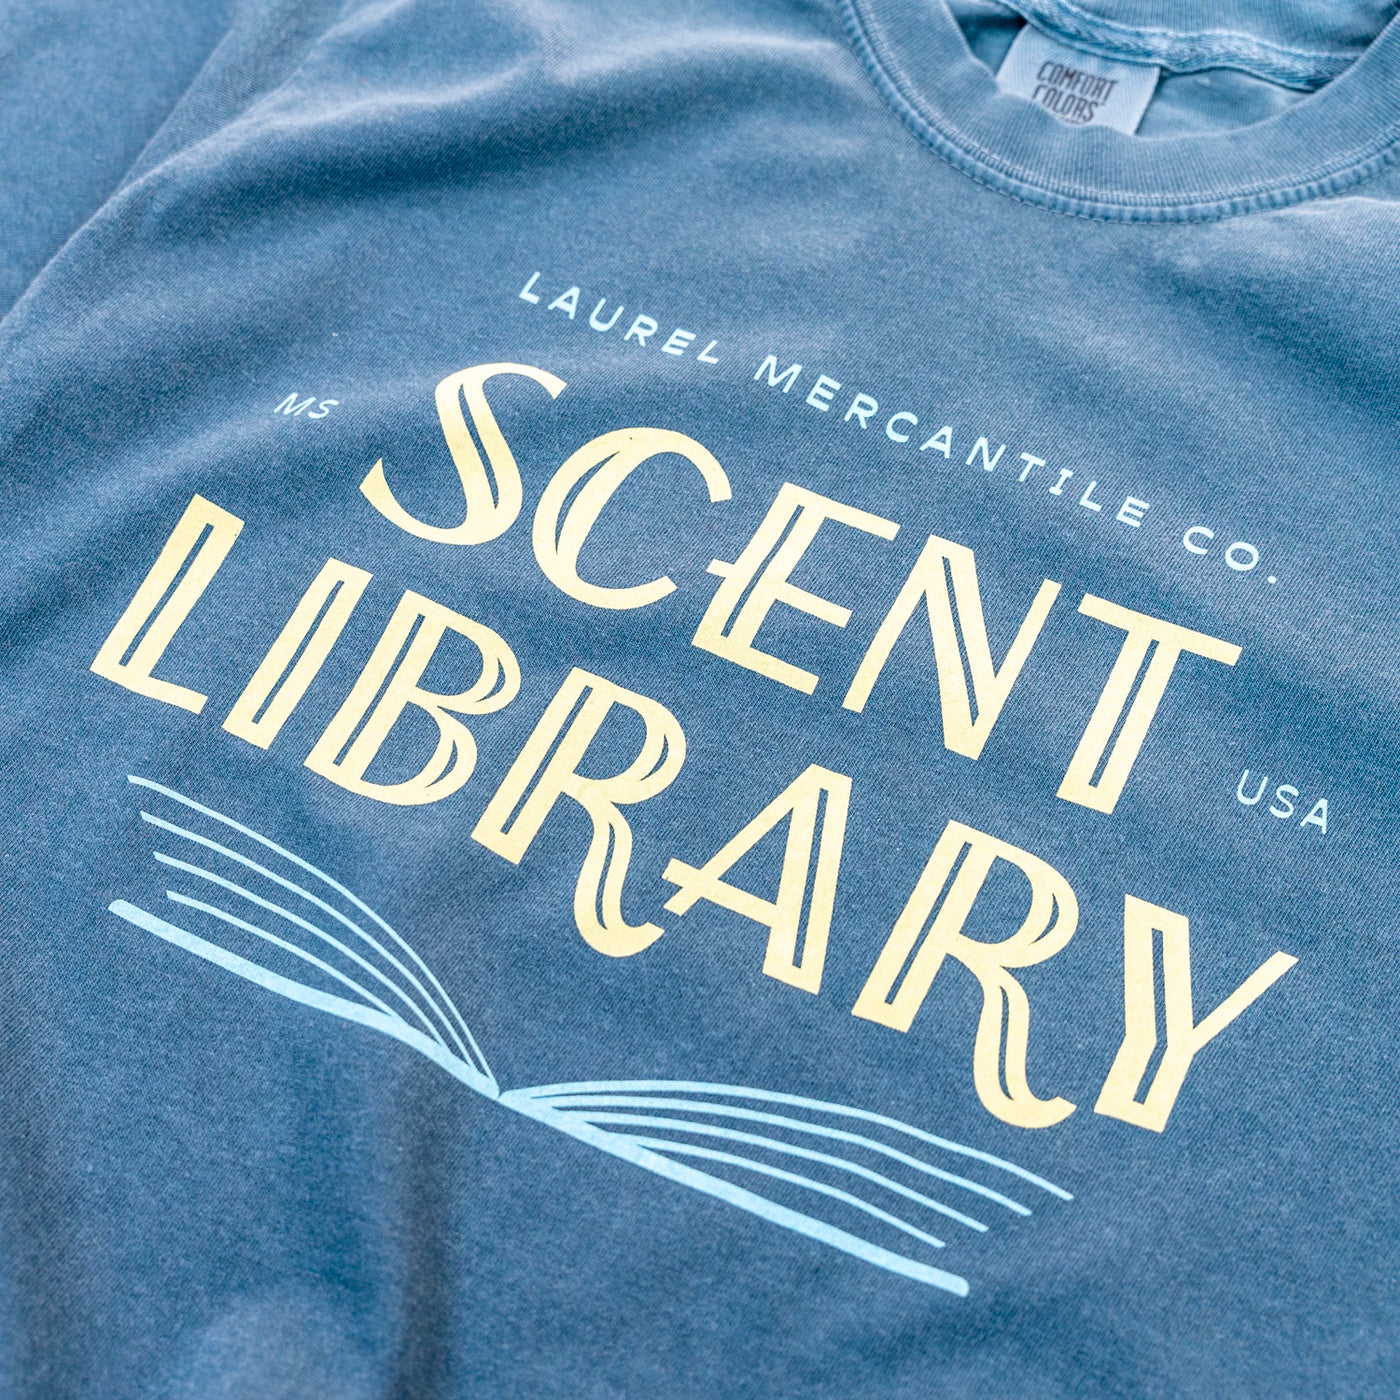 Scent Library Book Tshirt